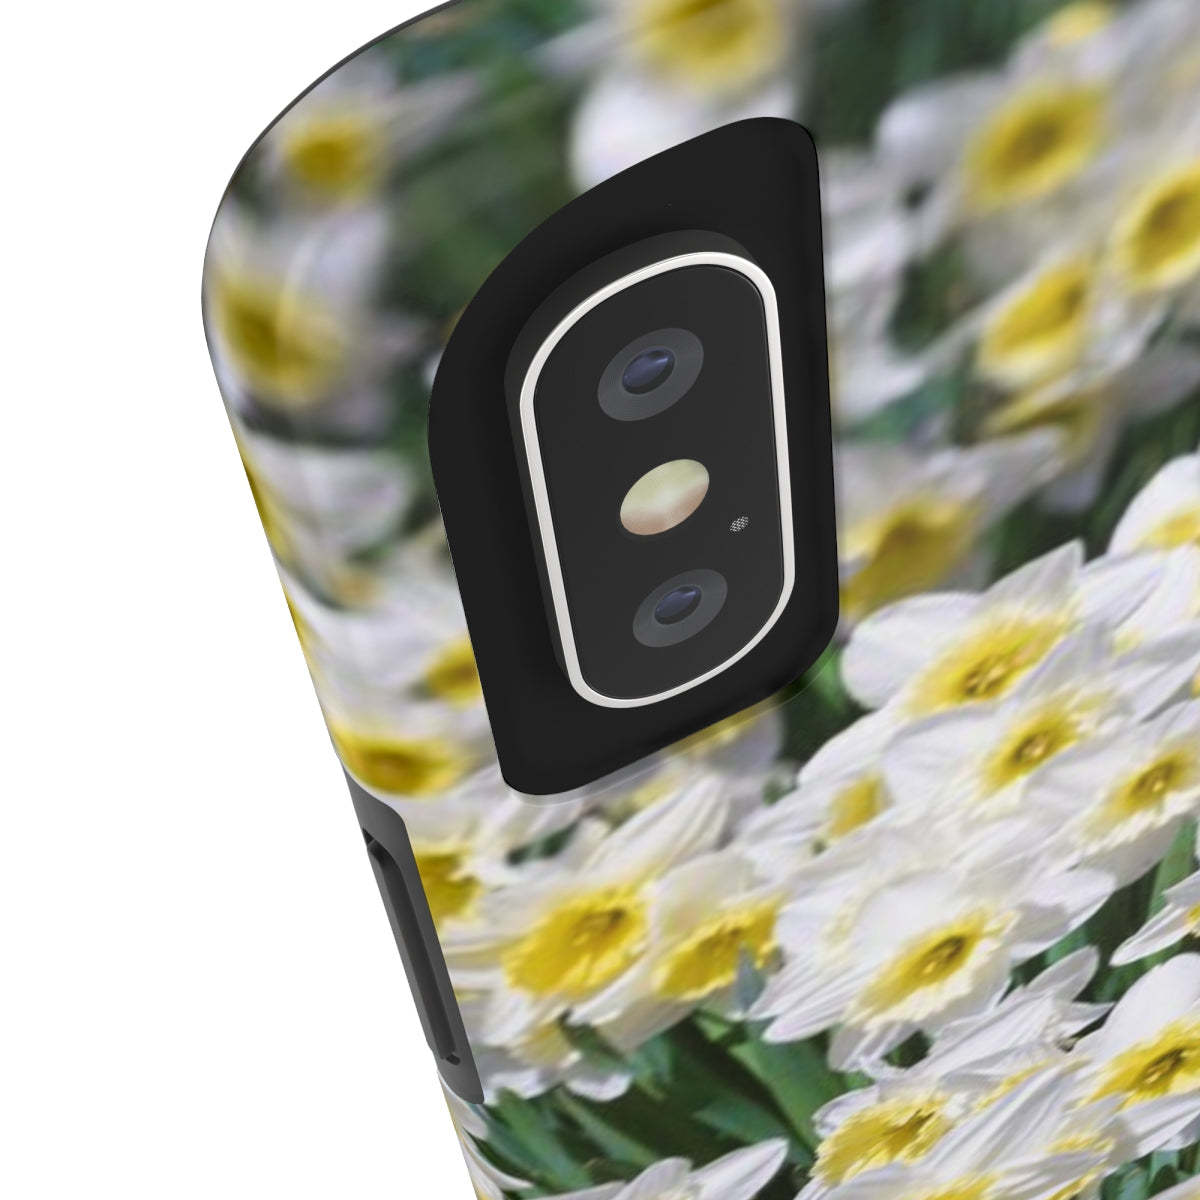 Spring Daffodils Tough Phone Cases, Case-Mate